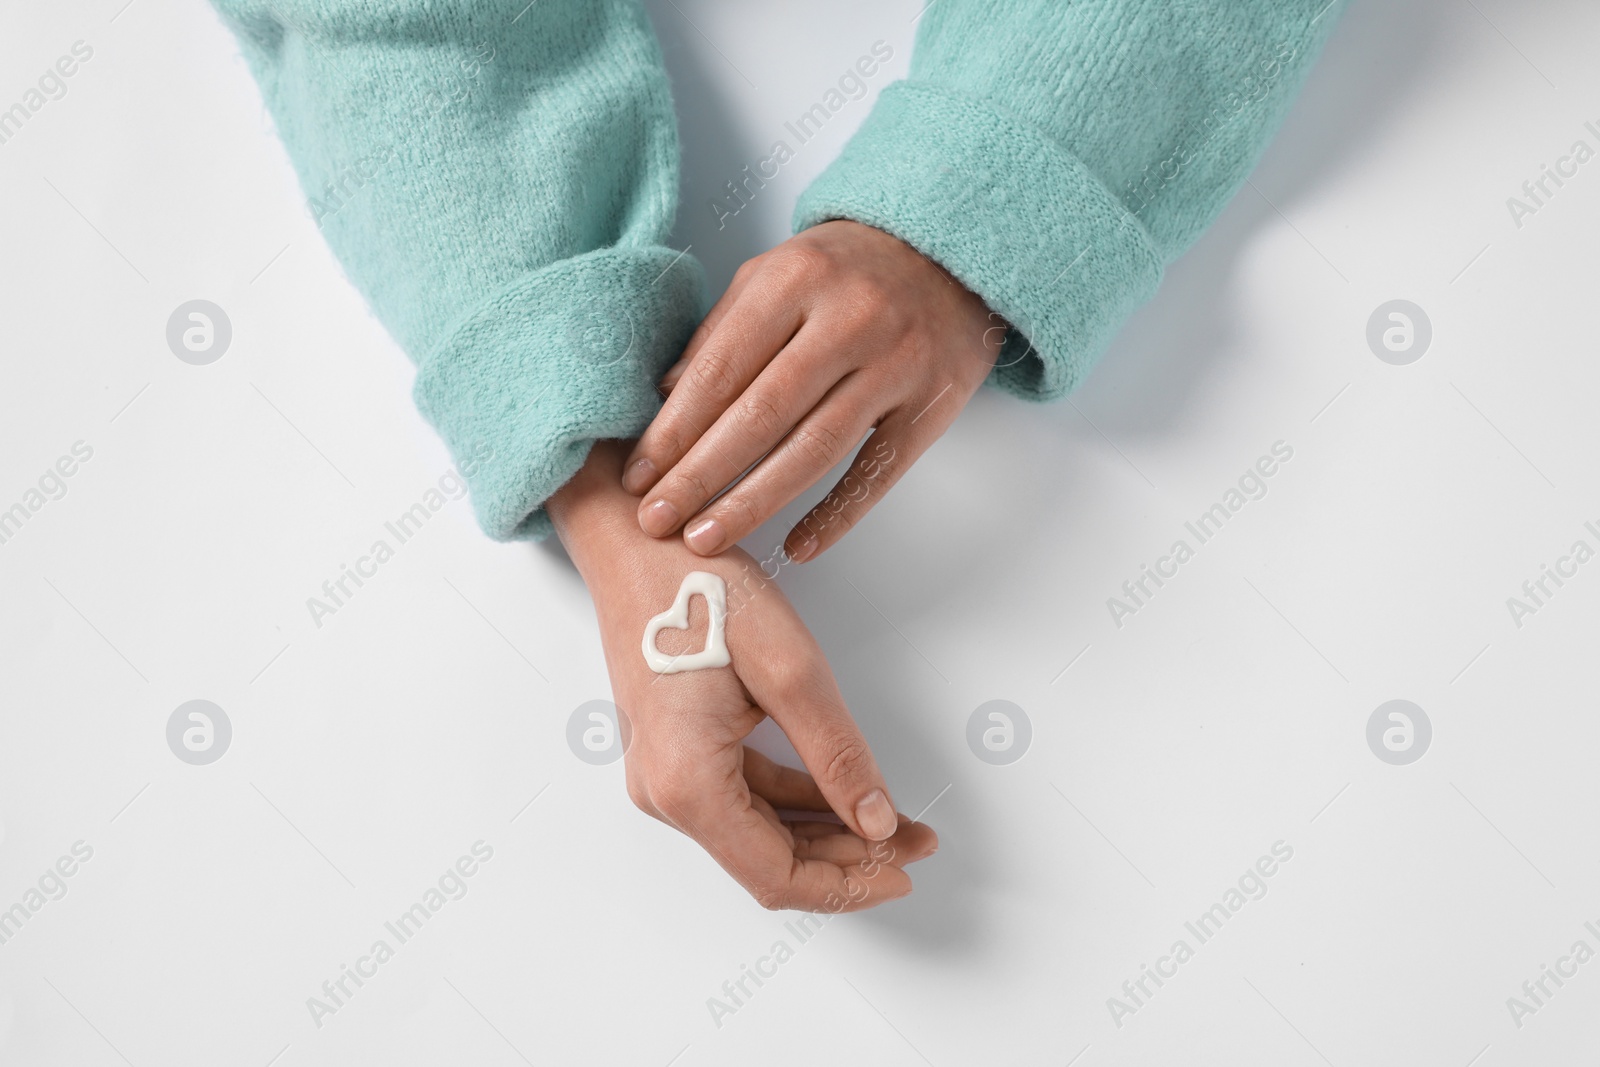 Photo of Woman with heart made of cosmetic cream on hand against white background, top view